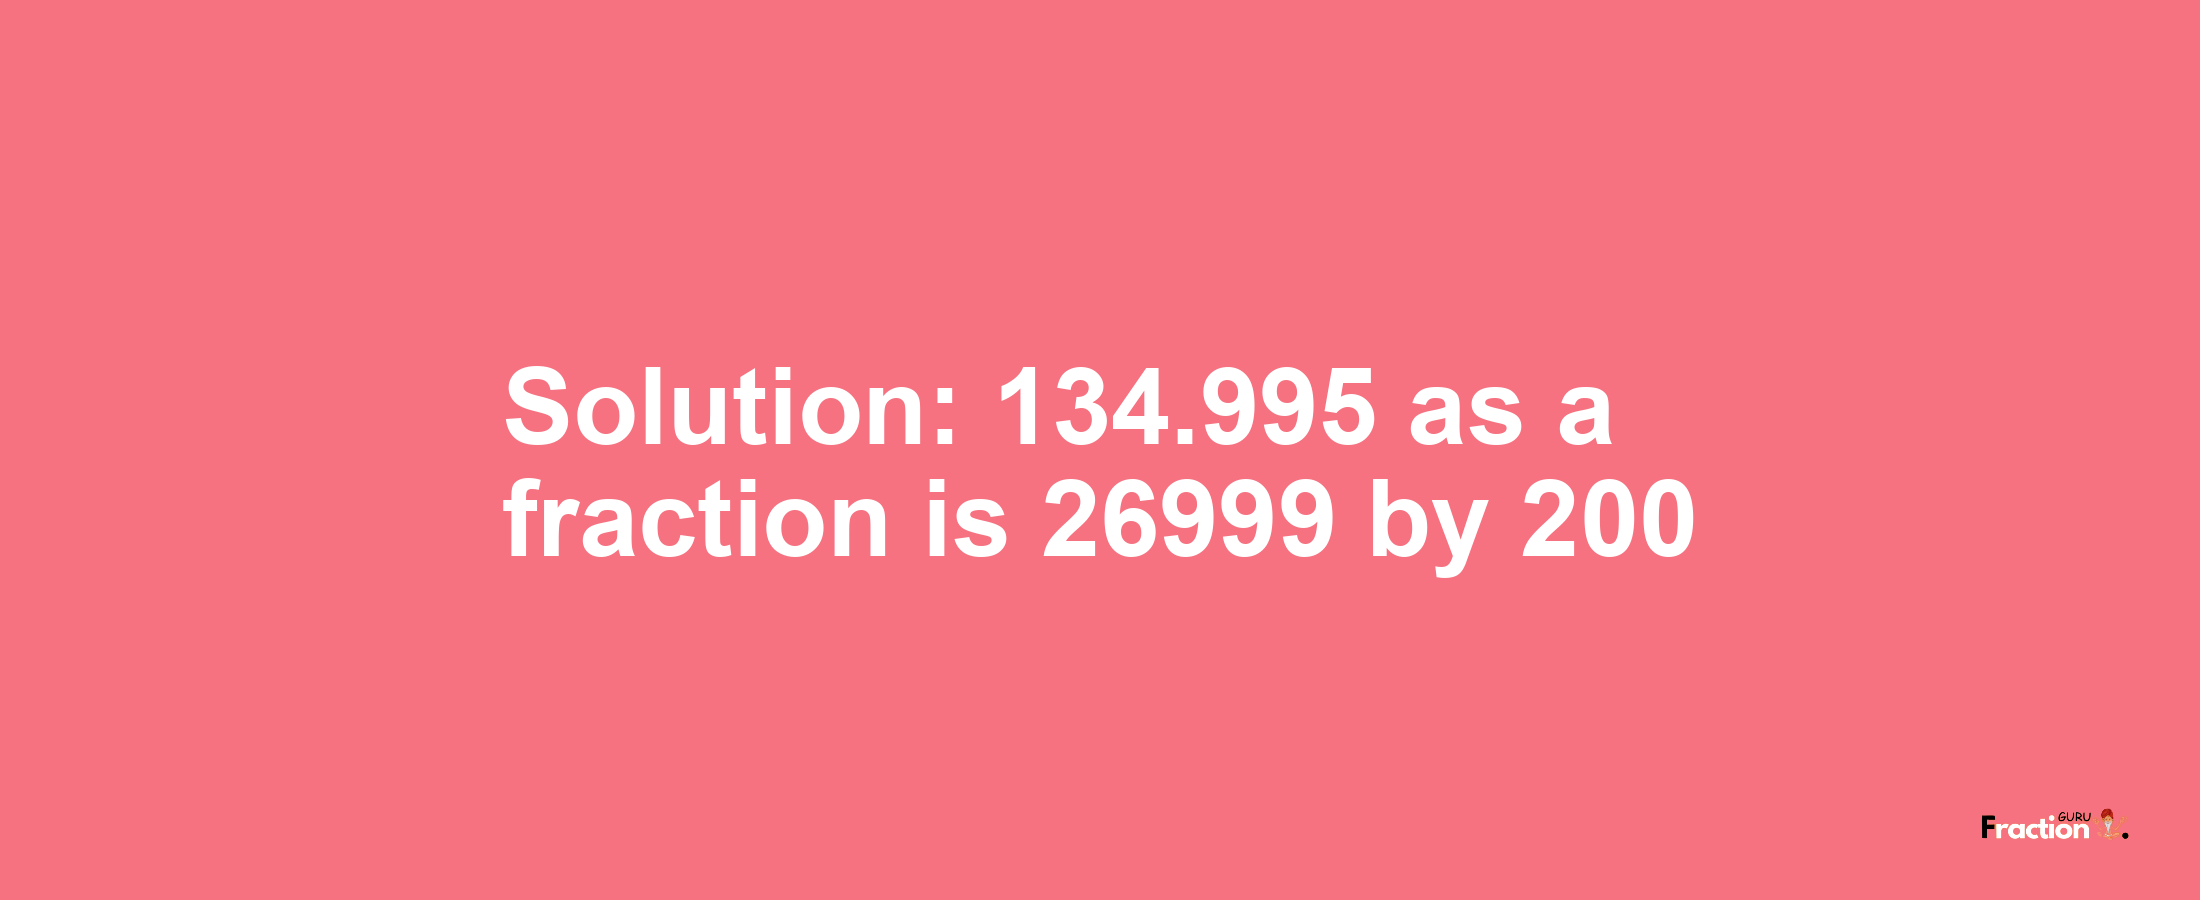 Solution:134.995 as a fraction is 26999/200